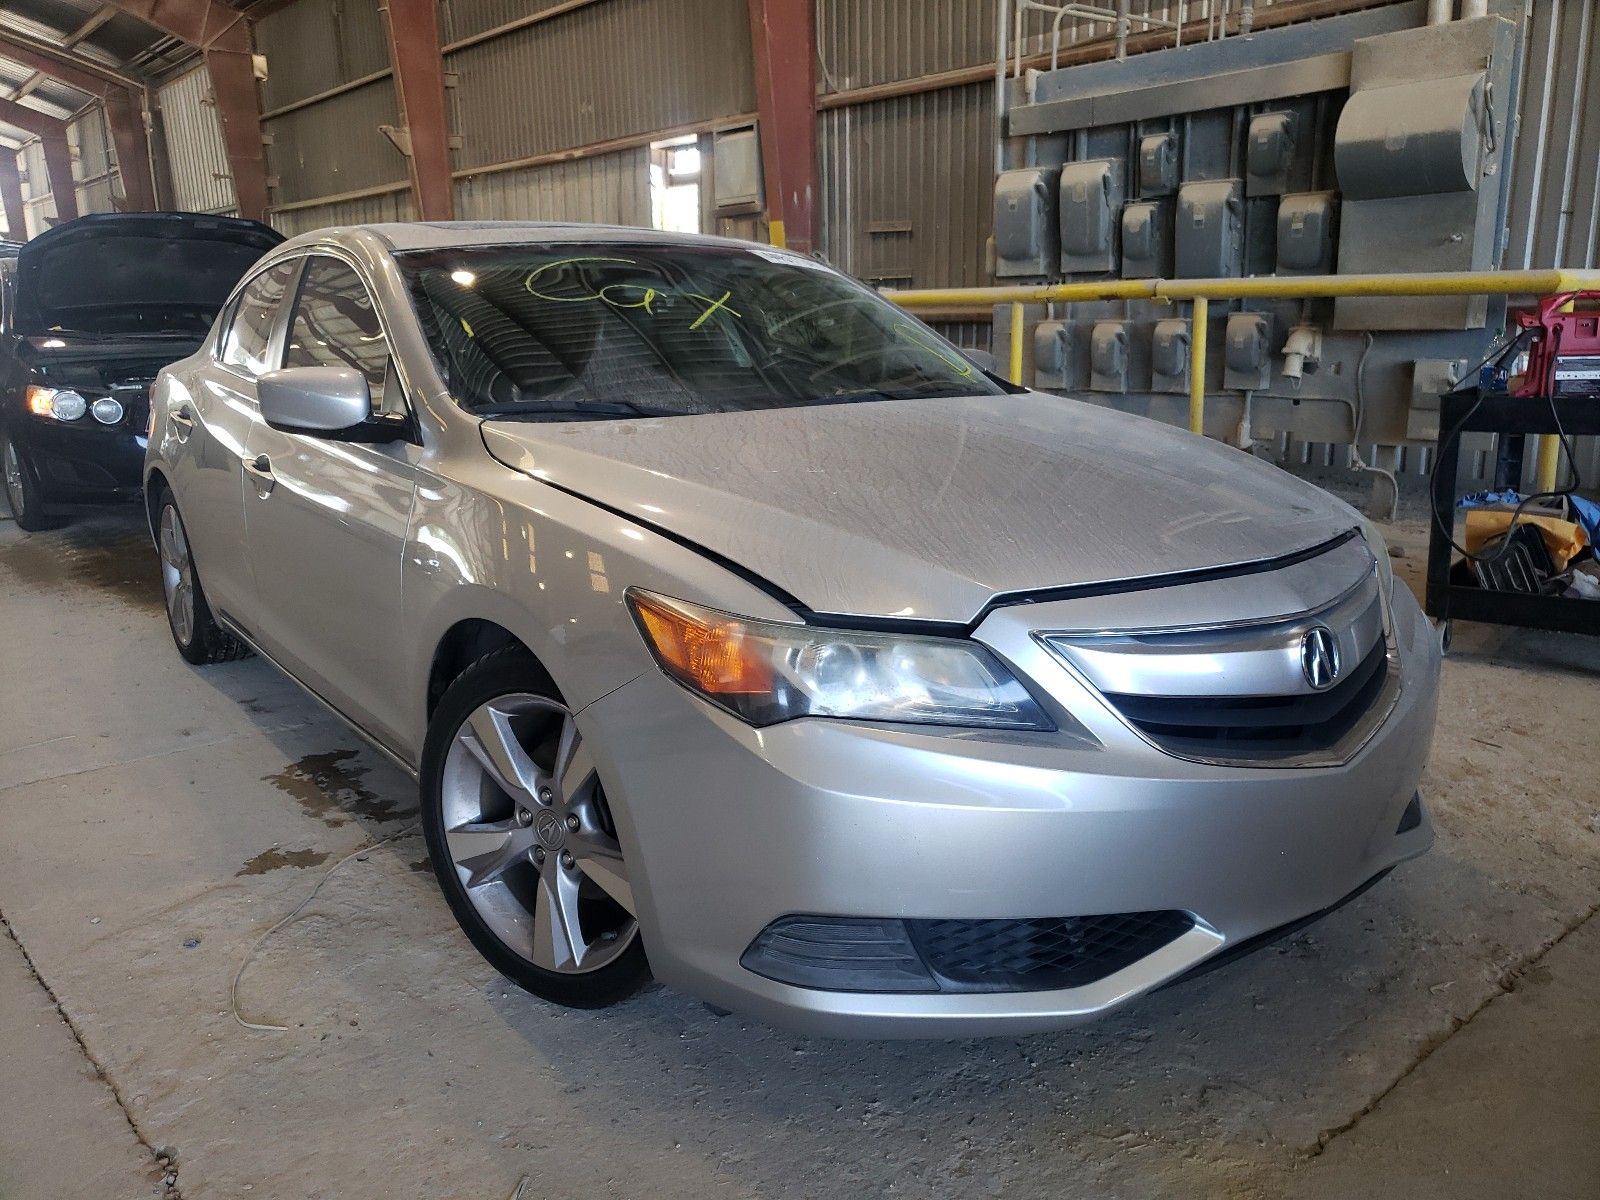 1 of 19VDE1F37EE011918 Acura 2014